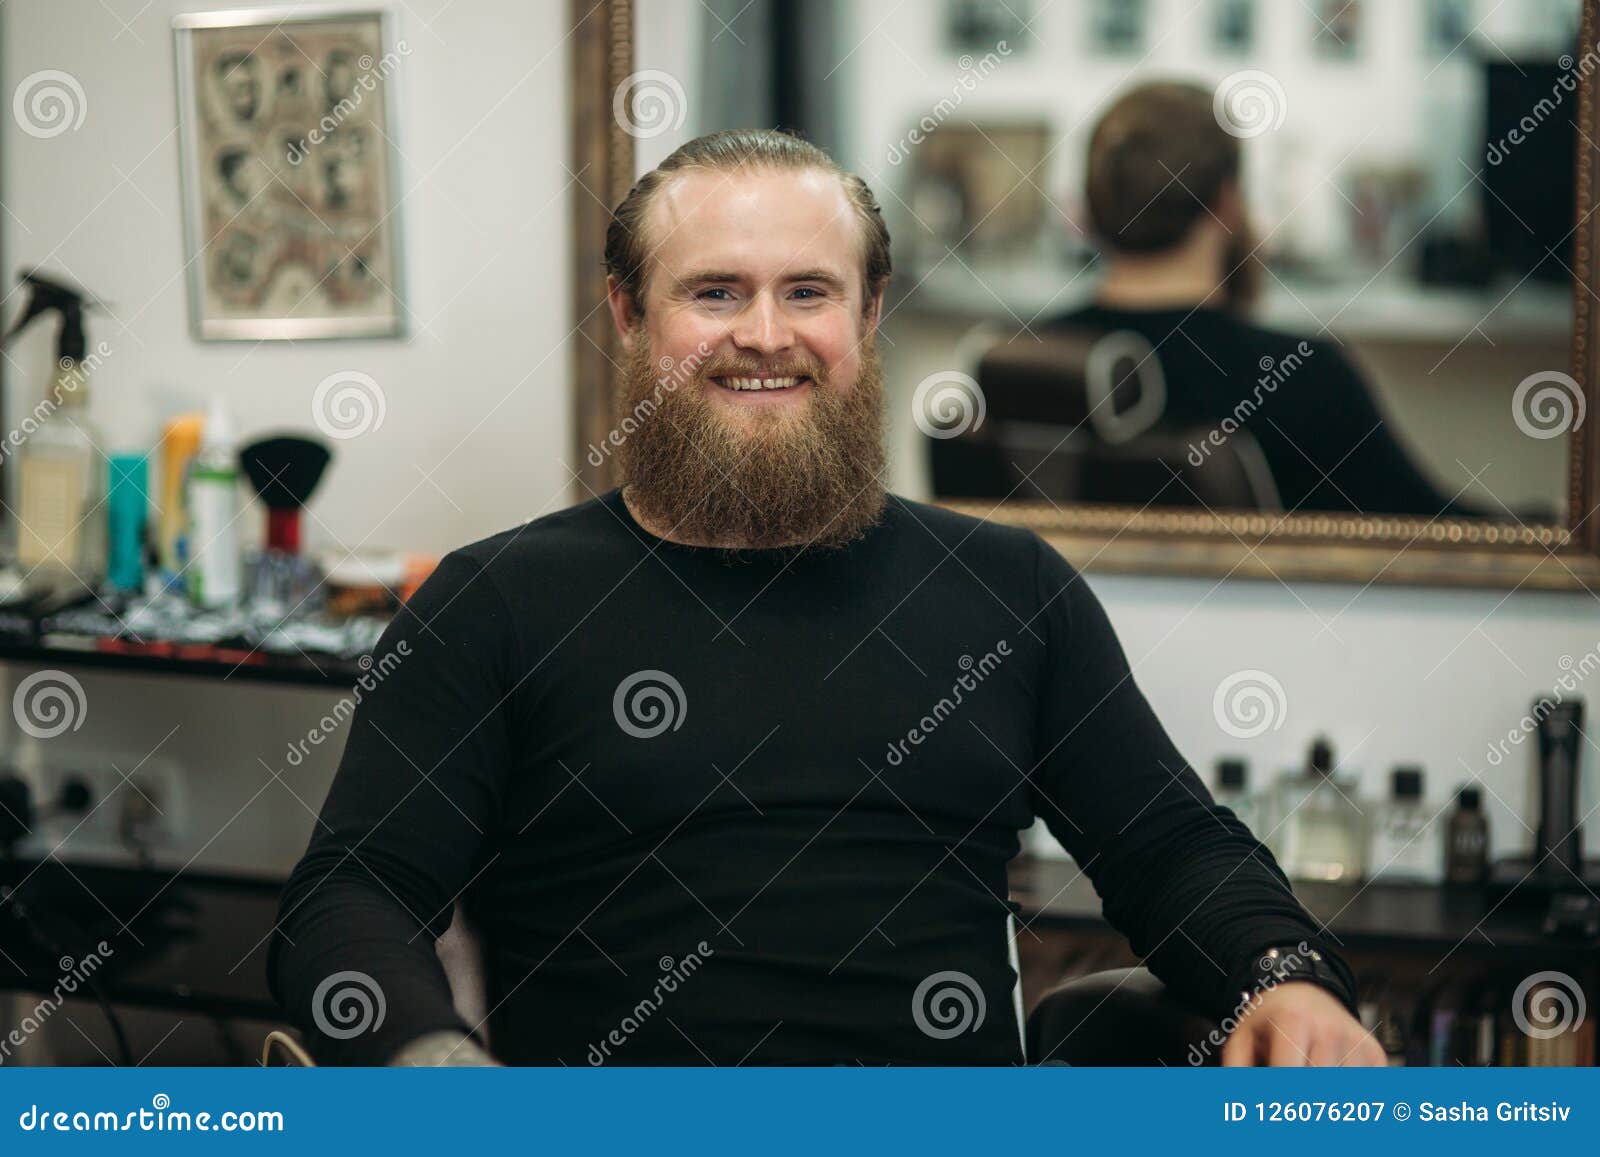 Handsome Young Bearded Guy Sitting in an Armchair in a Beauty Salon ...